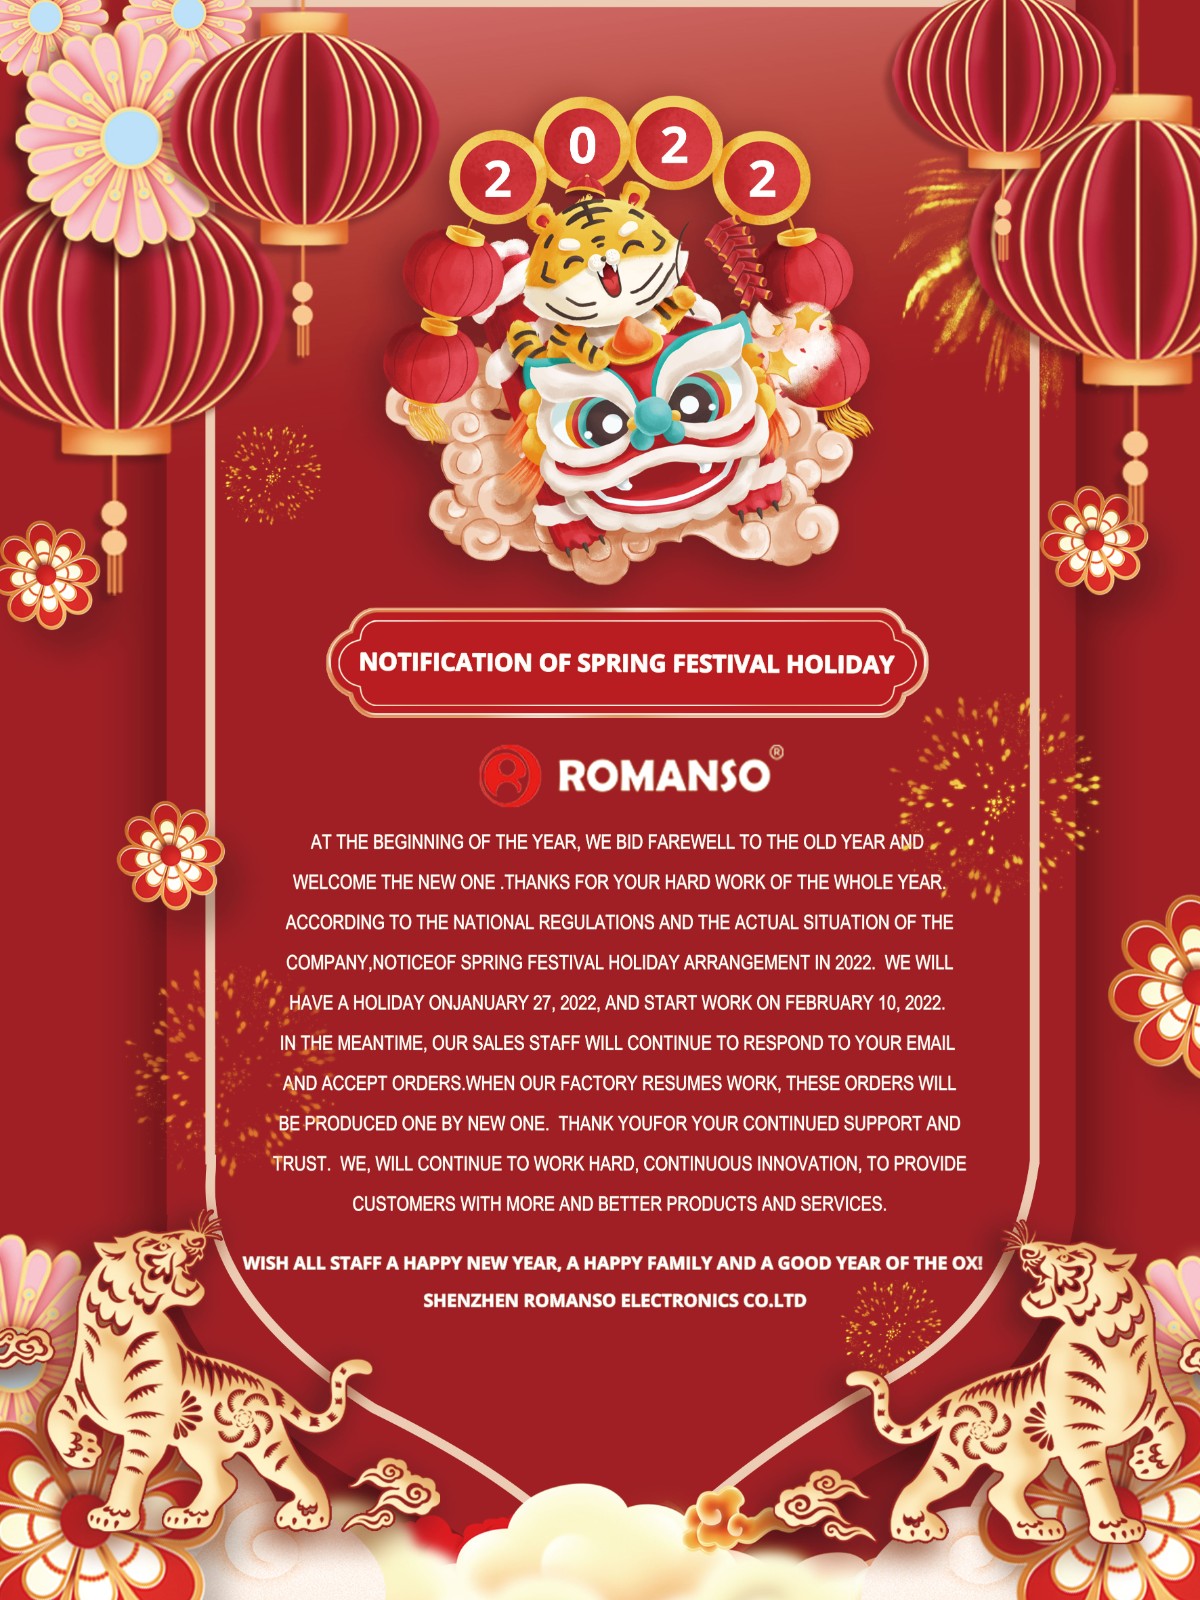 Romanso Notice of Spring Festival Holiday 2022